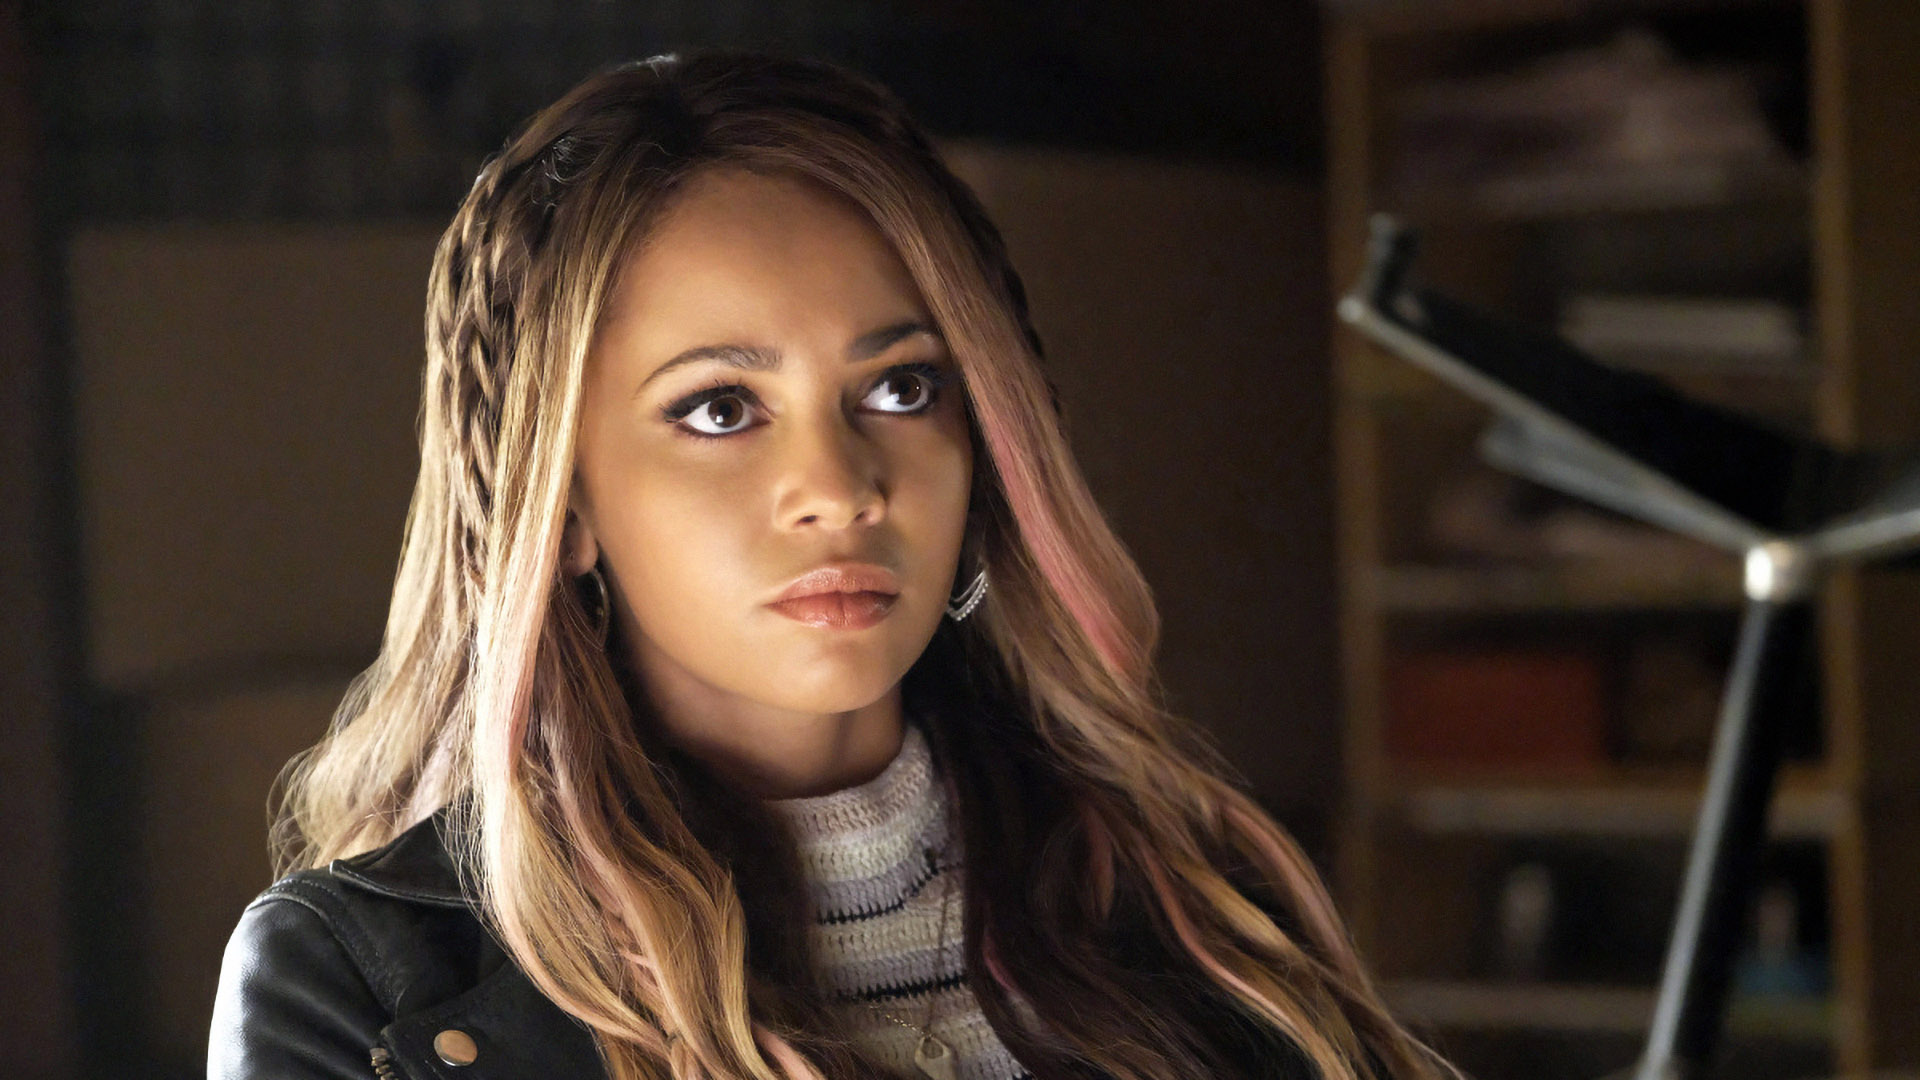 What's Next for Vanessa Morgan Now That Riverdale's Over? The CW Drama, Apparently